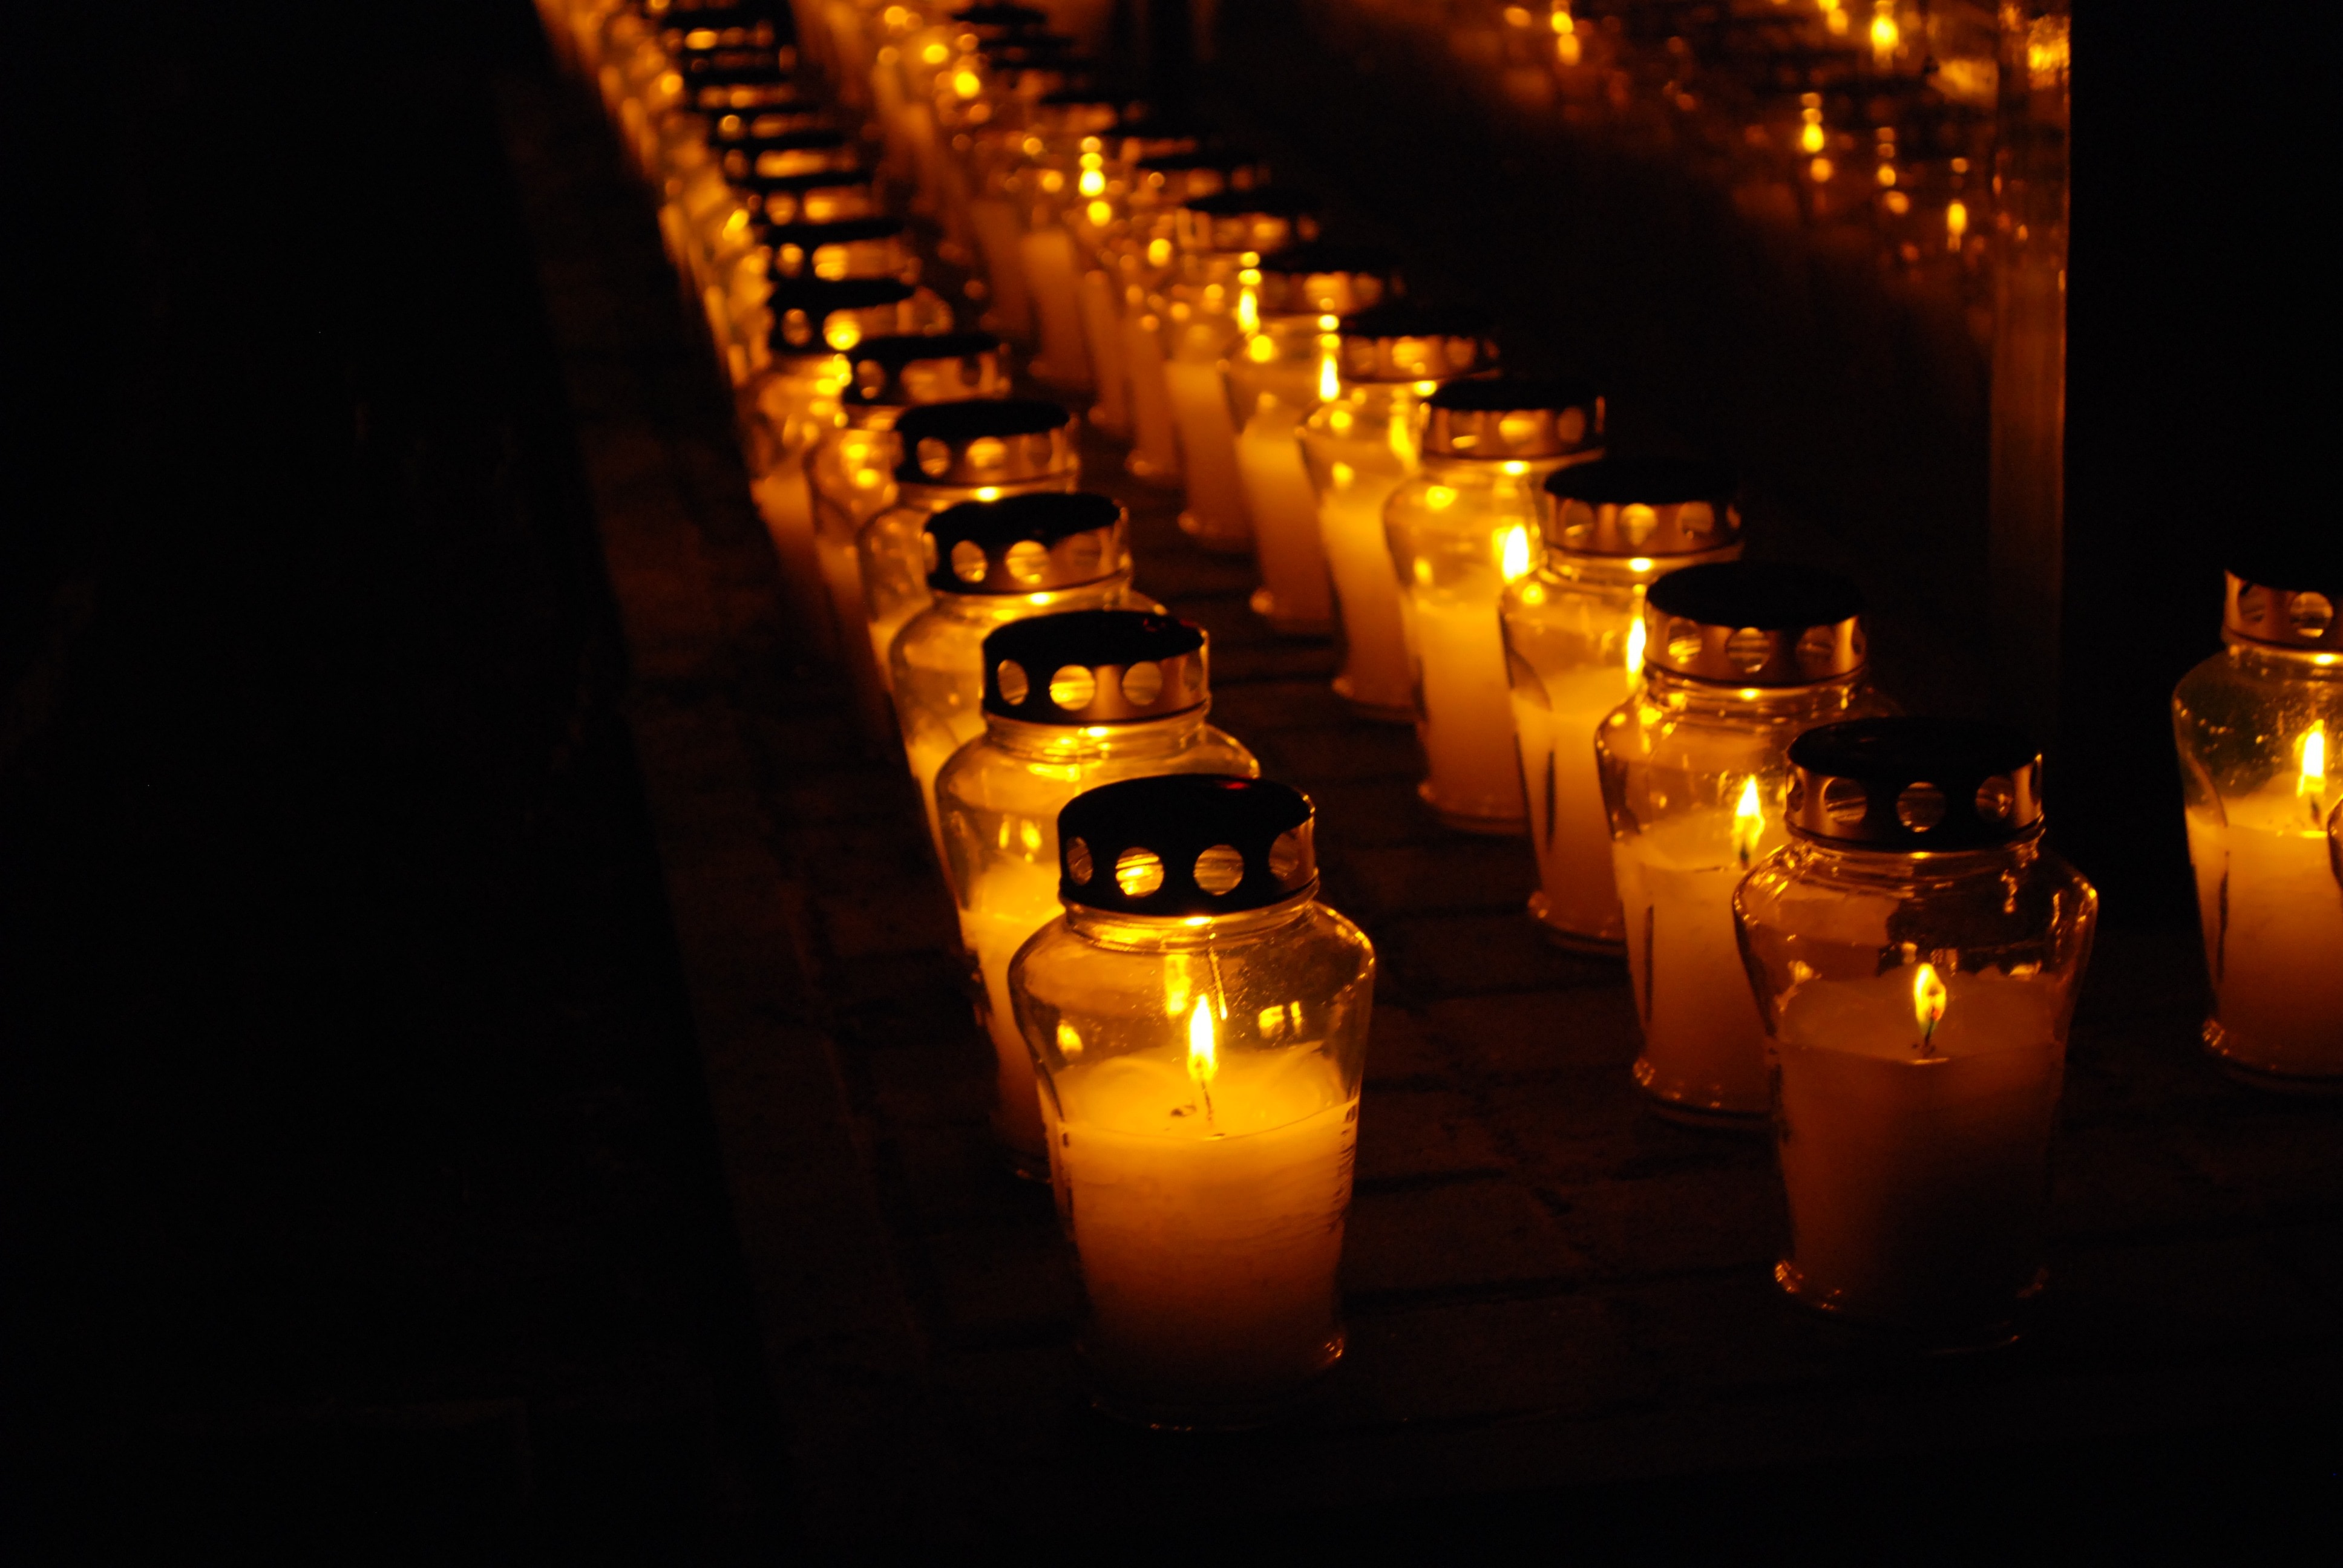 Candle, Light, Cemetery, Candles, candle, in a row